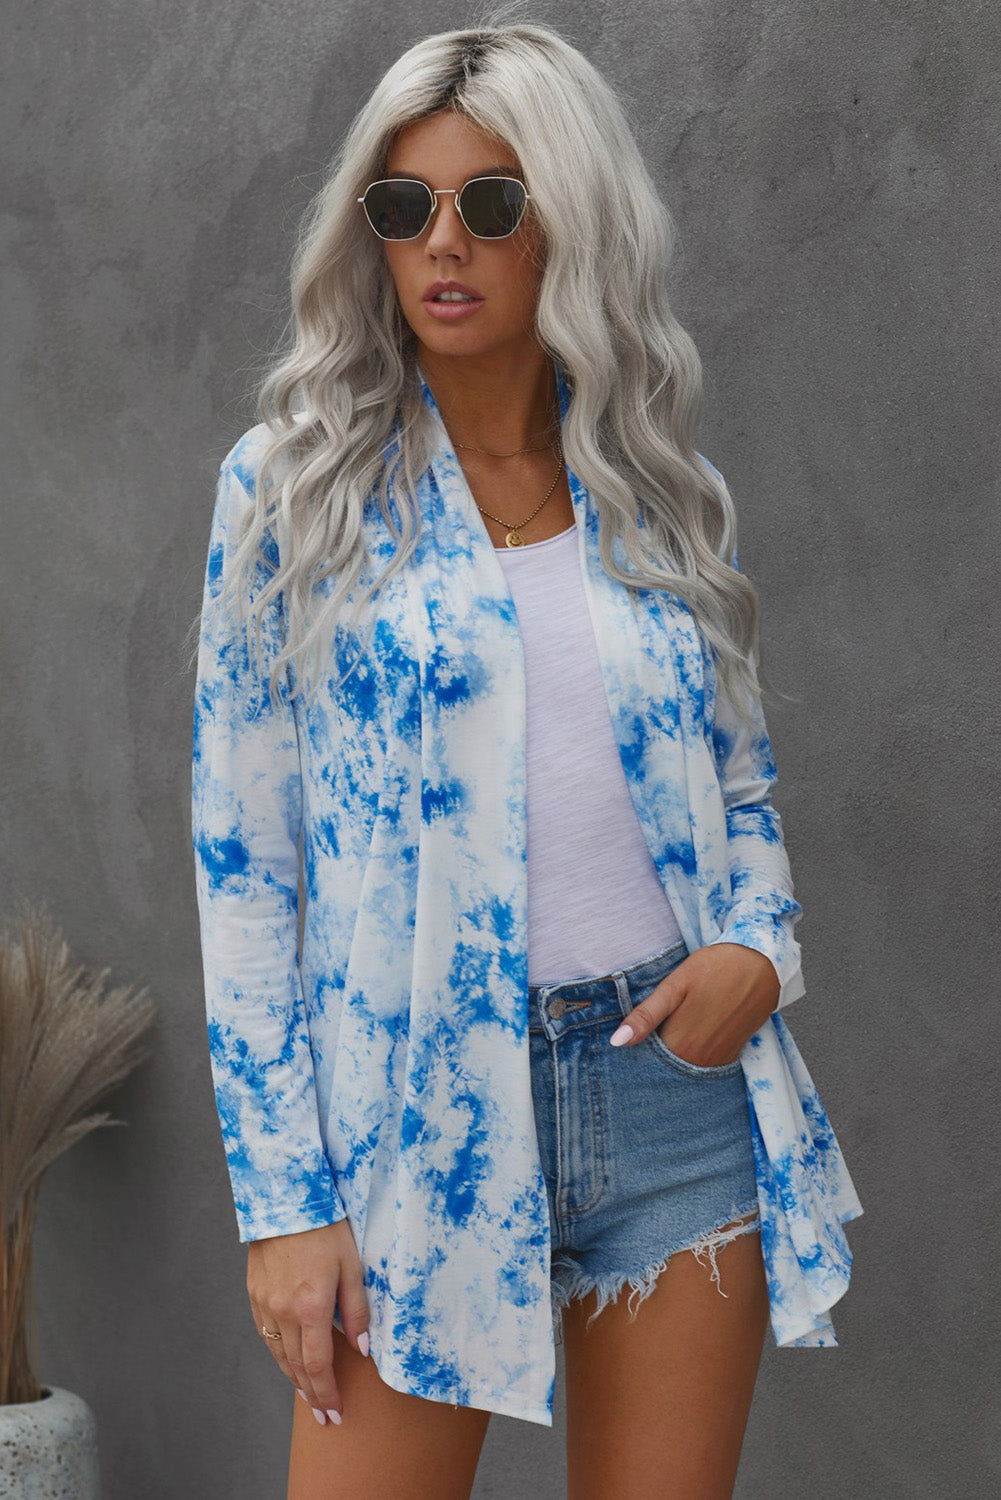 Up In The Clouds Cardigan